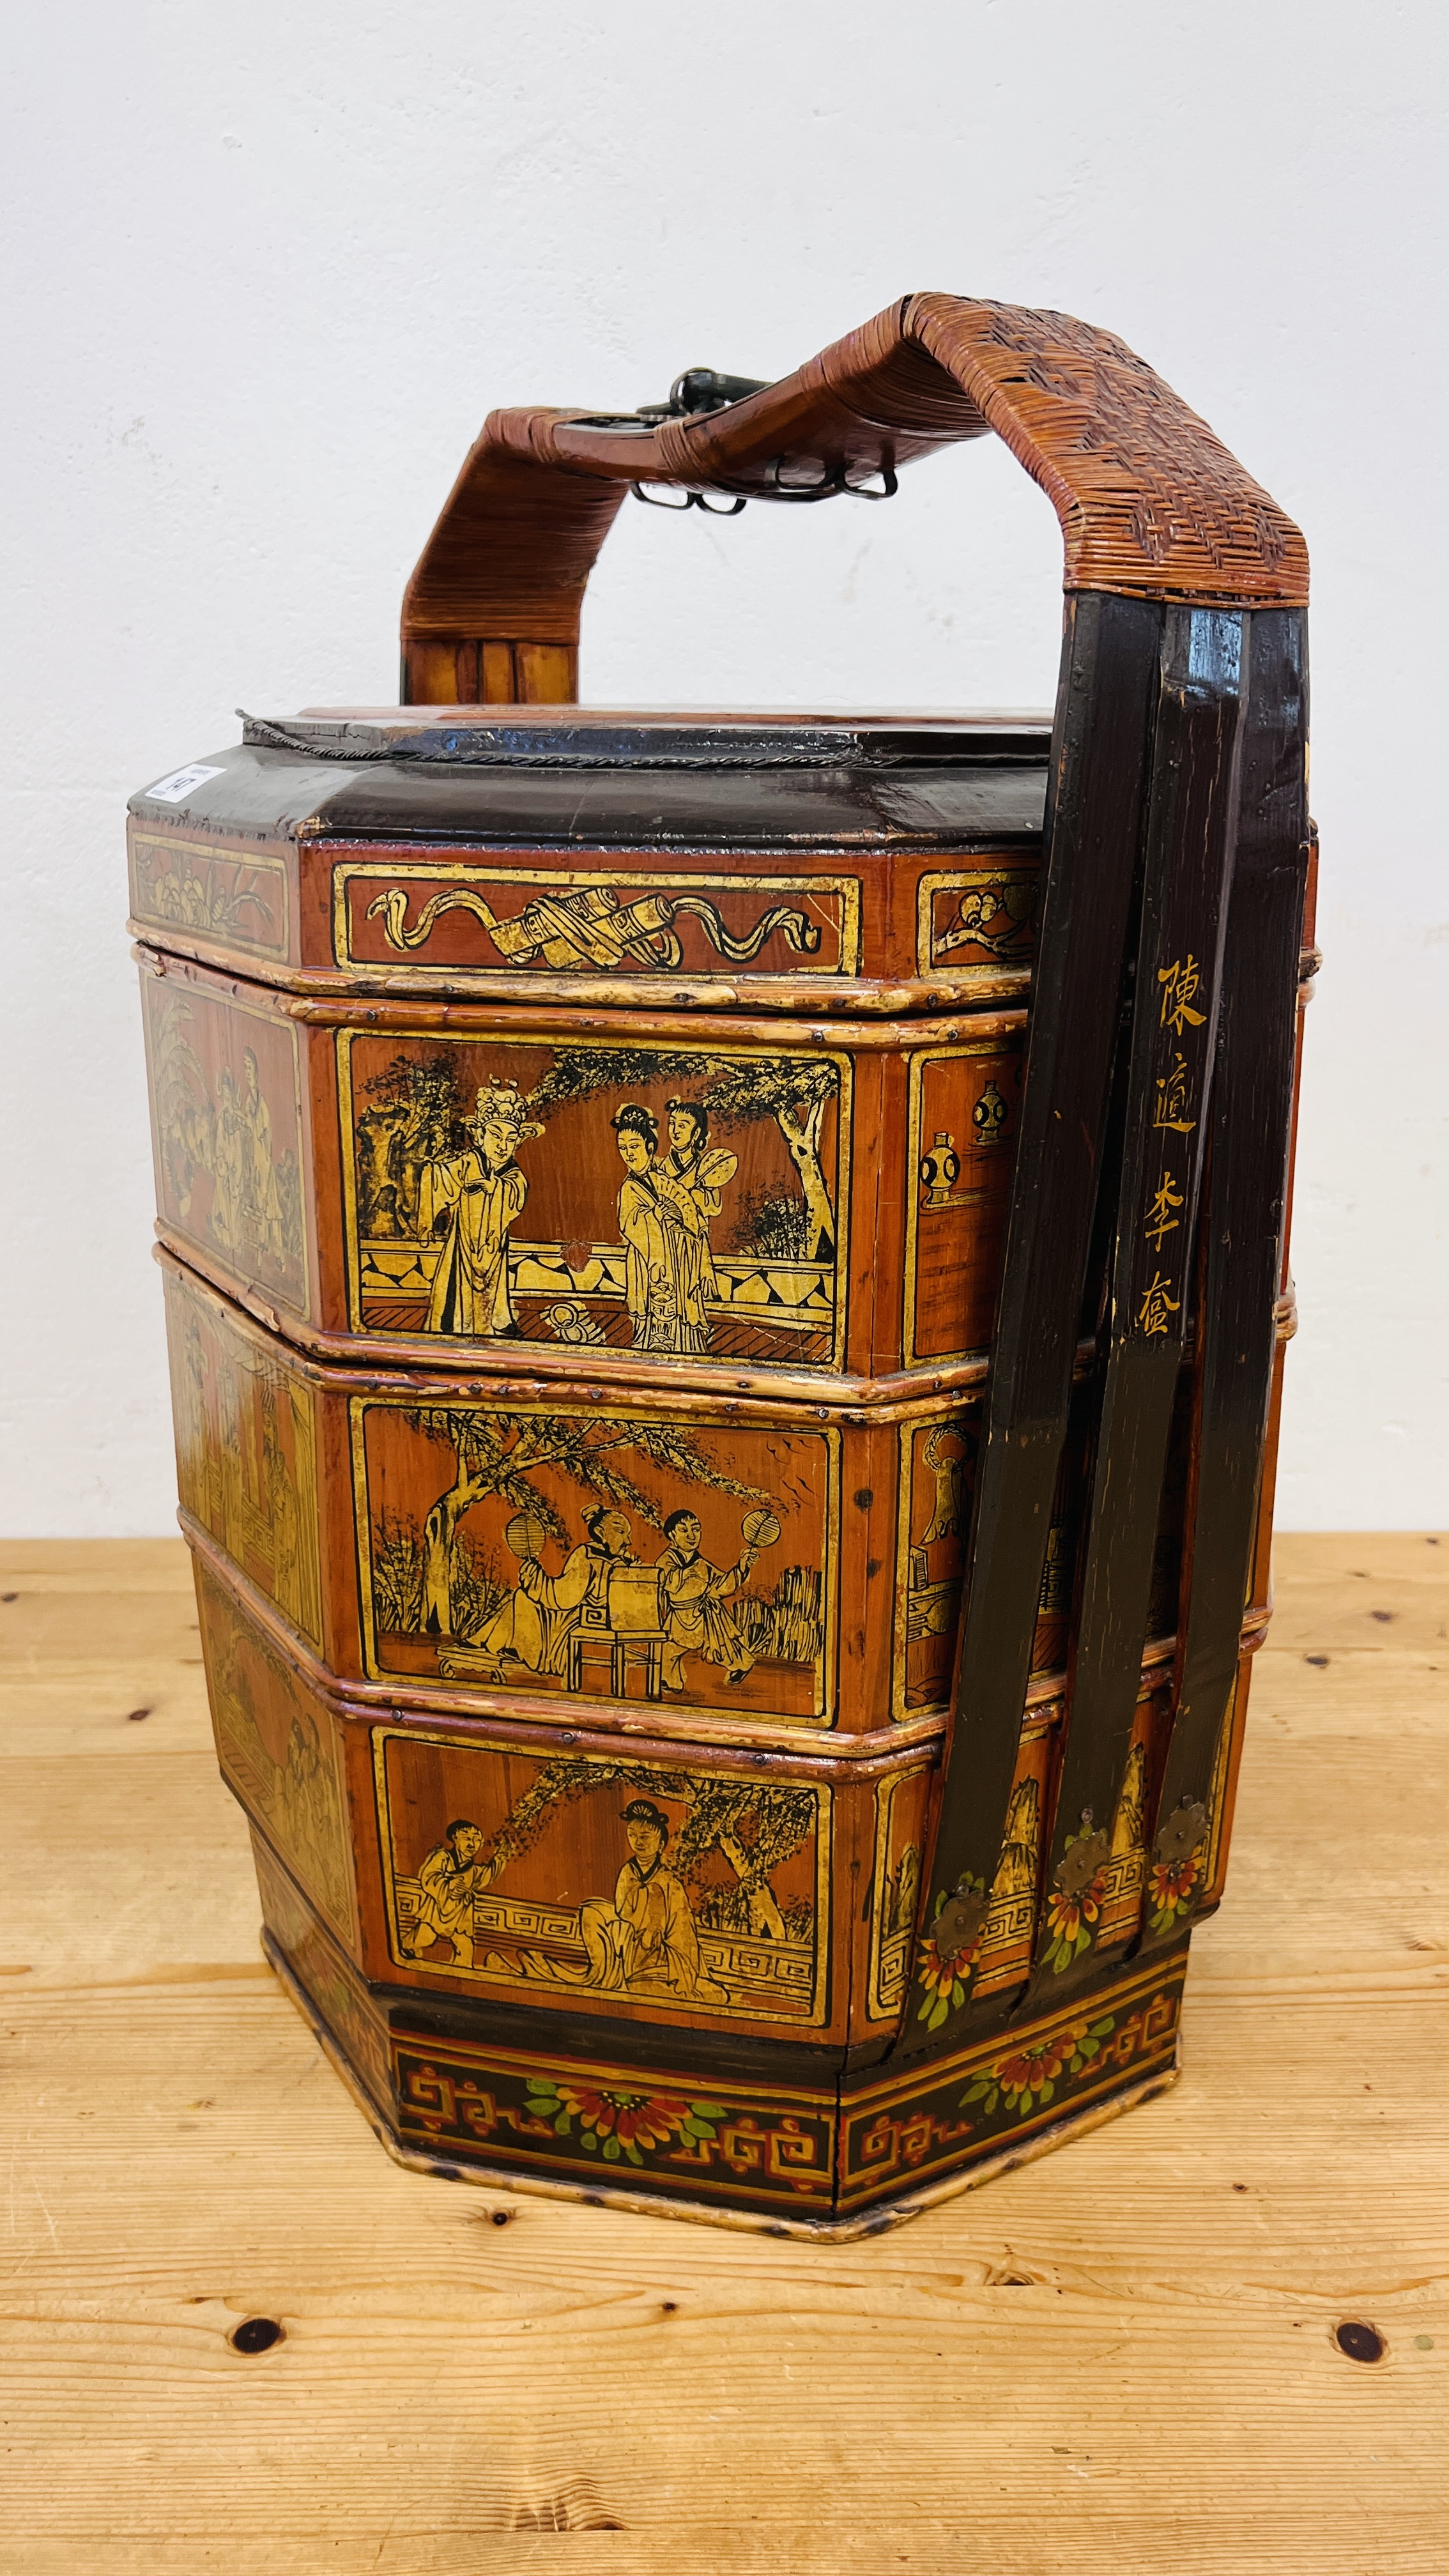 A HIGHLY DECORATIVE GILT DECORATED AND LACQUERED CHINESE WEDDING BASKET - HEIGHT 62CM. - Image 2 of 12